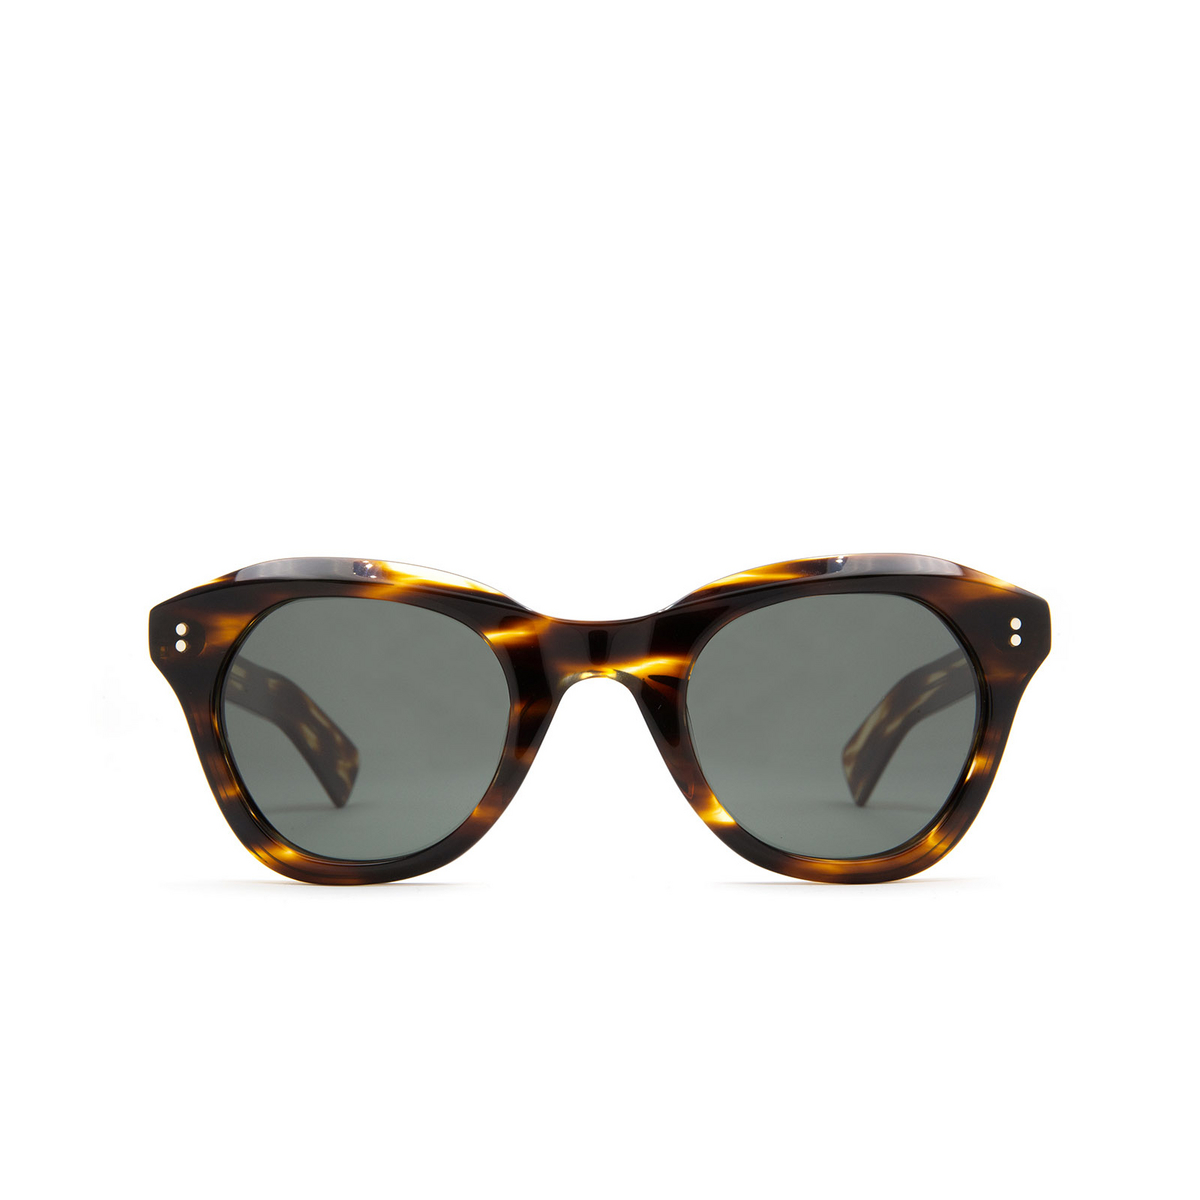 Lesca LOOPING Sunglasses A3 Striped Havana - front view